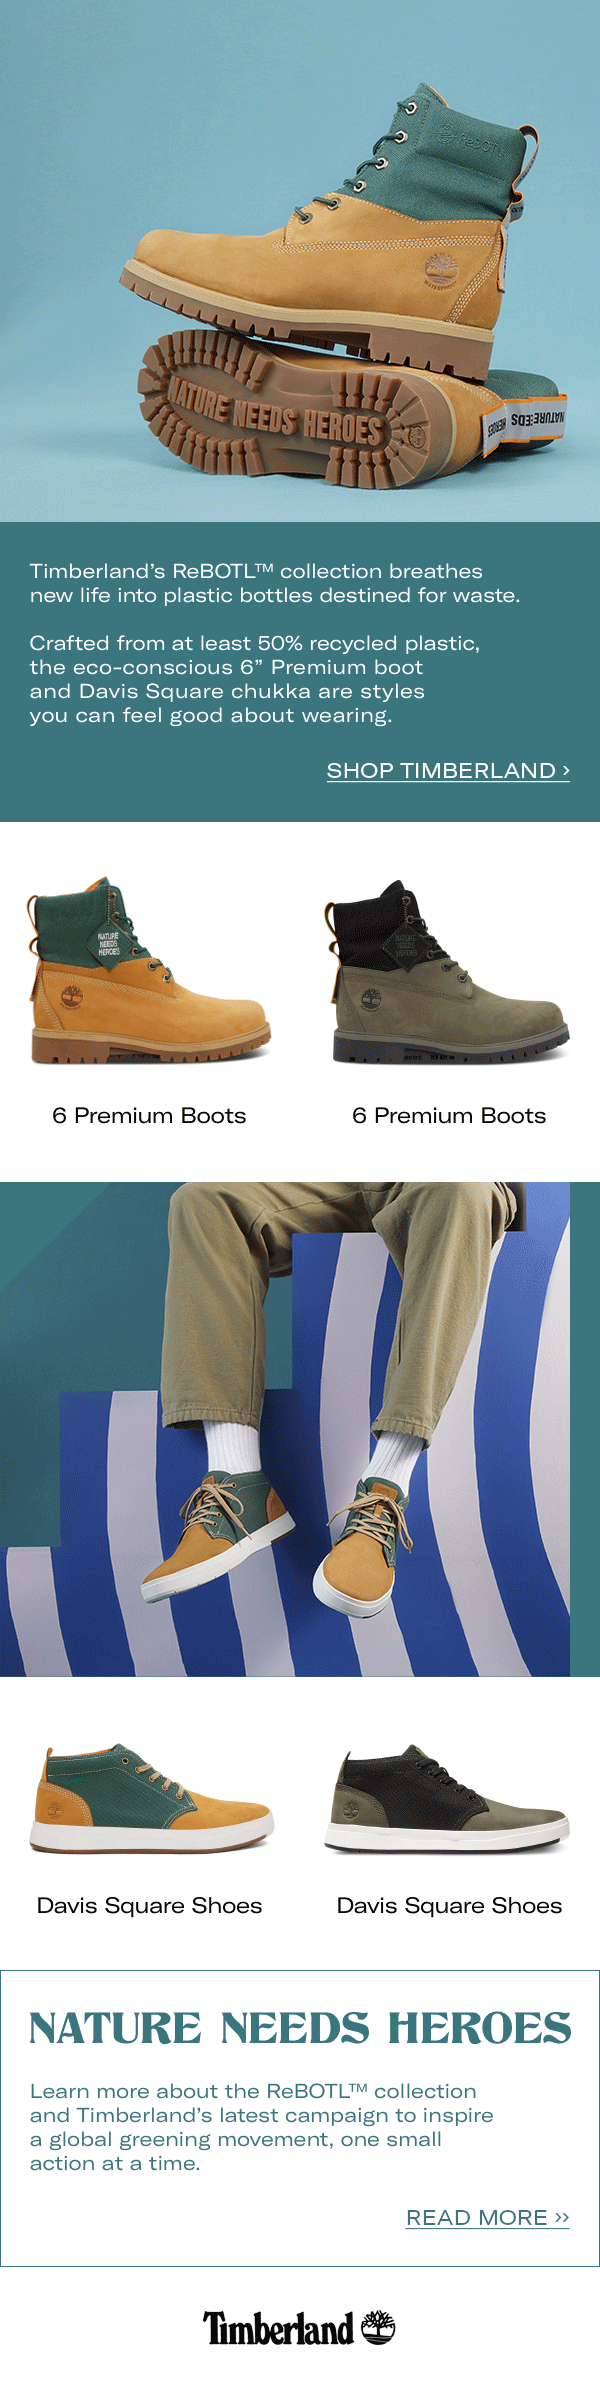 SS20_01_28_NL_Timberland_Recycled-en.gif